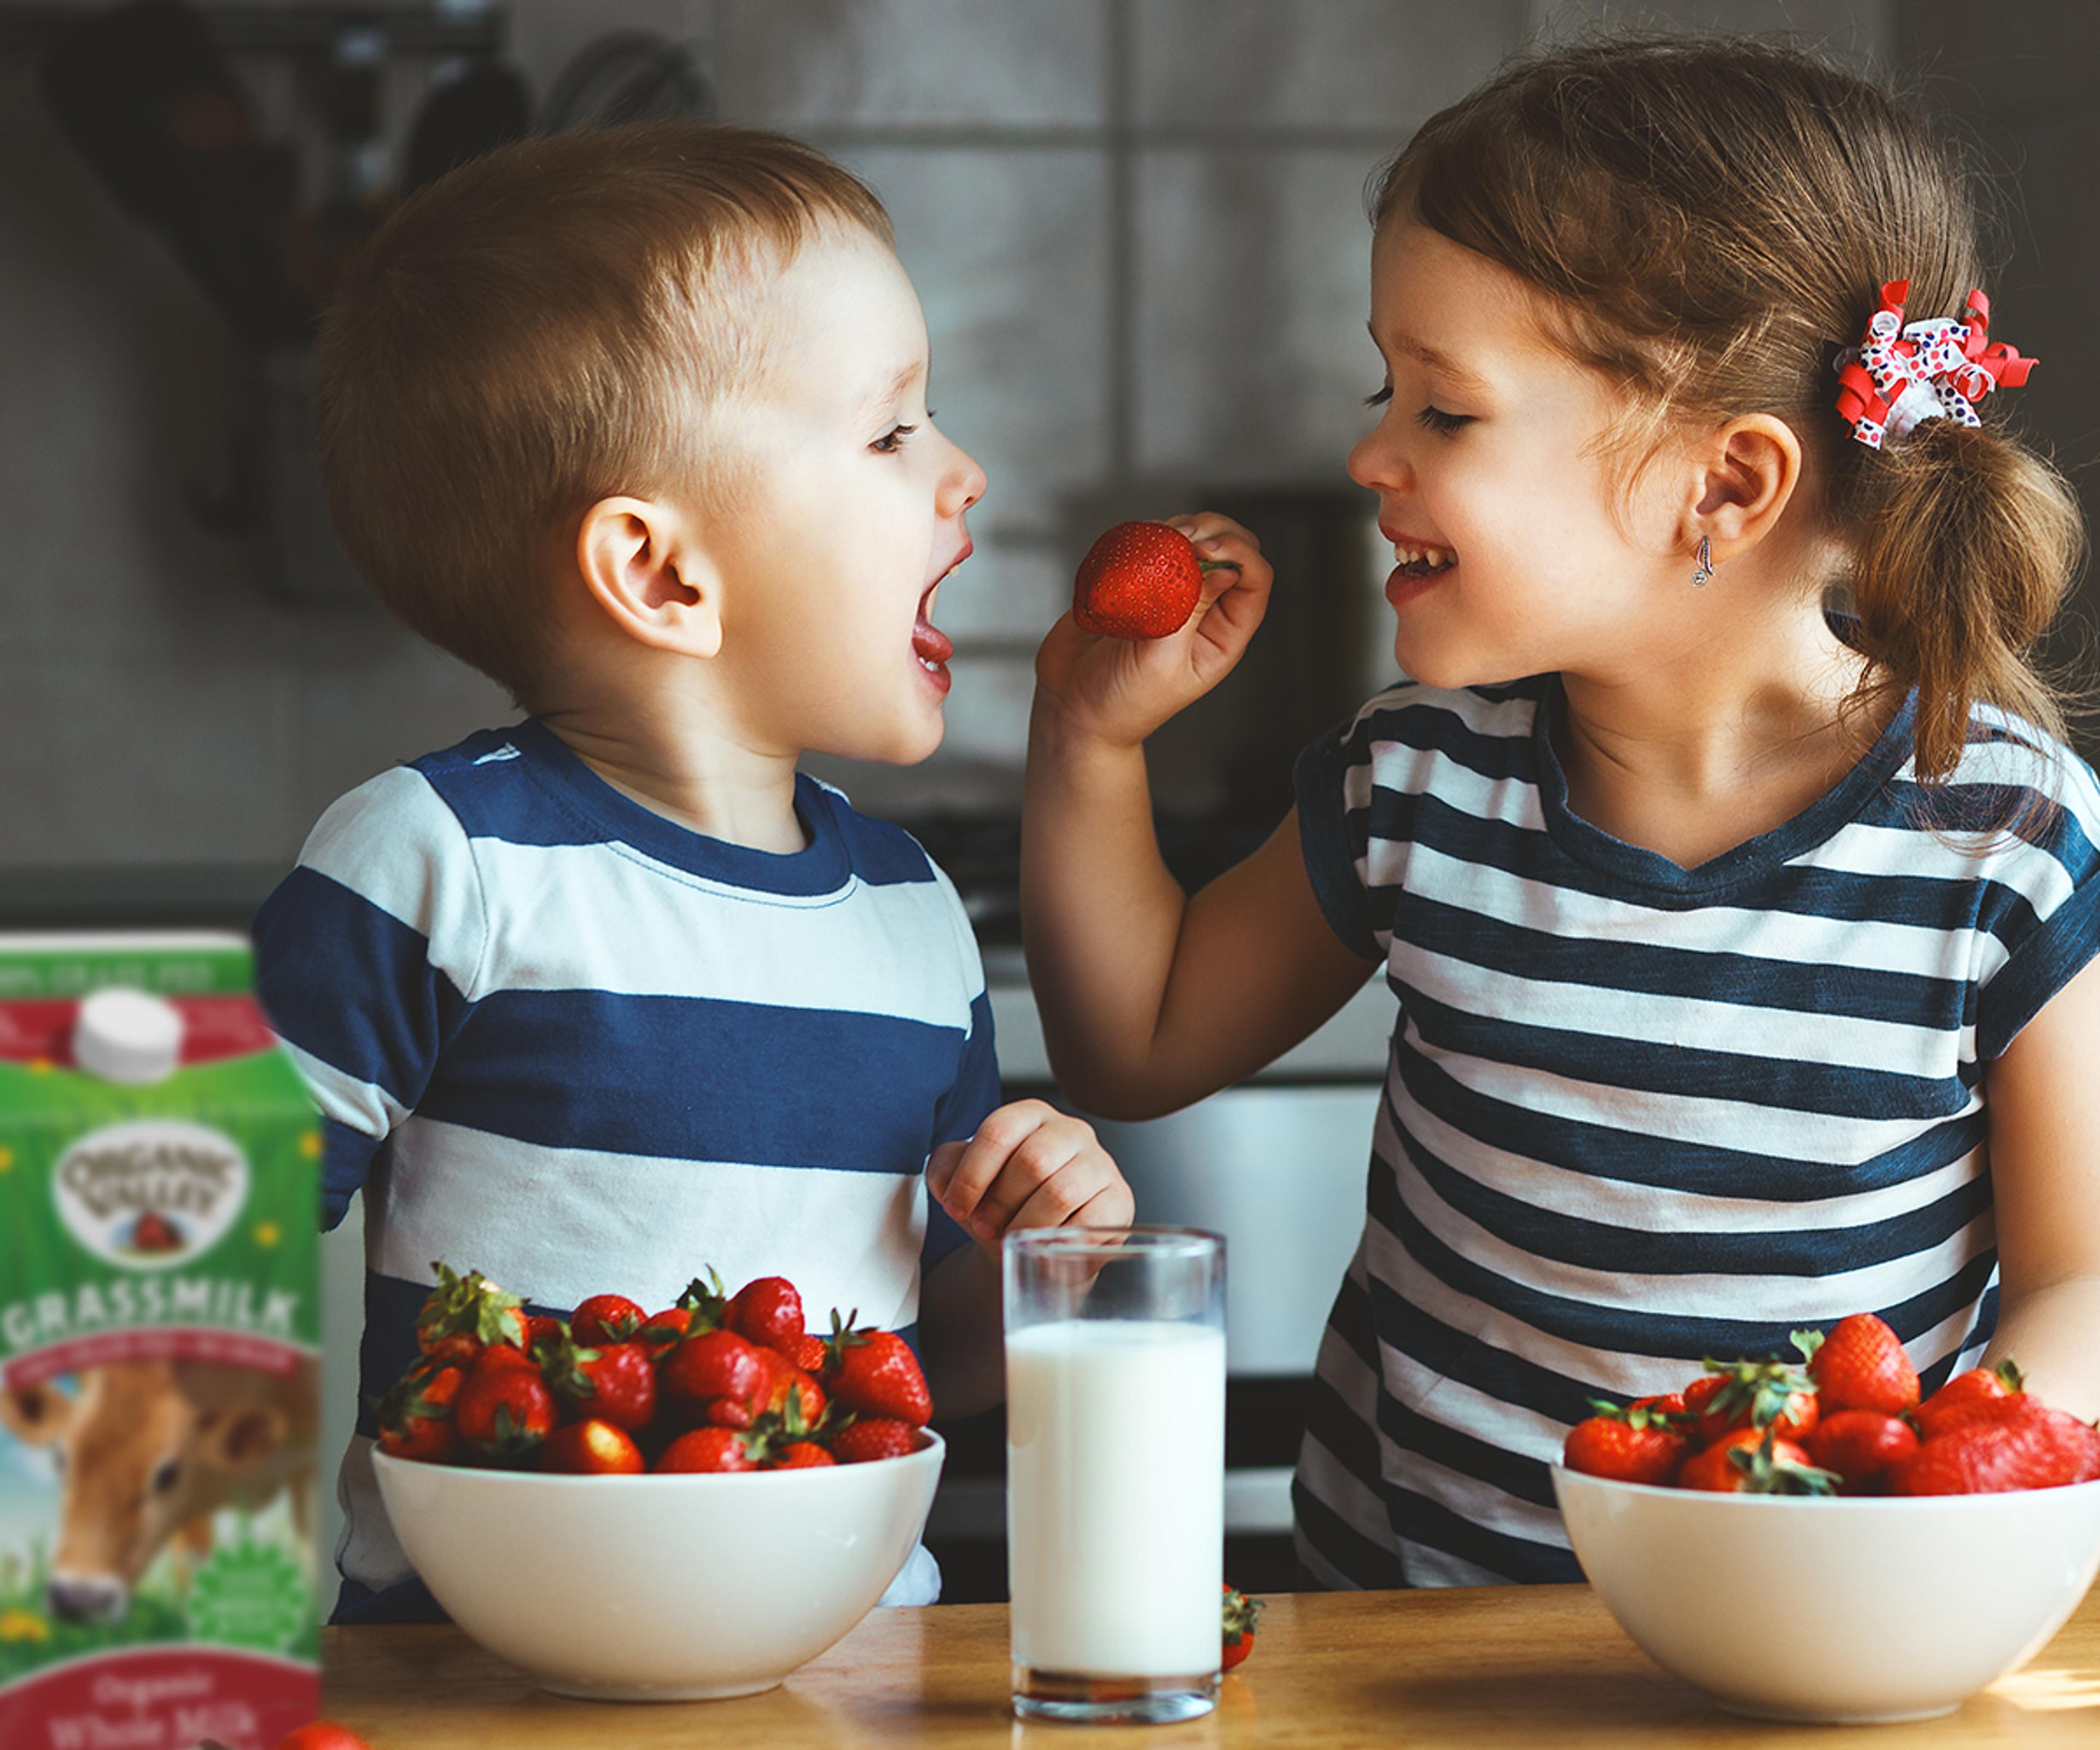 A little girl feeds a little boy a strawberry. They have bowls of strawberries and a glass of milk in front of them.